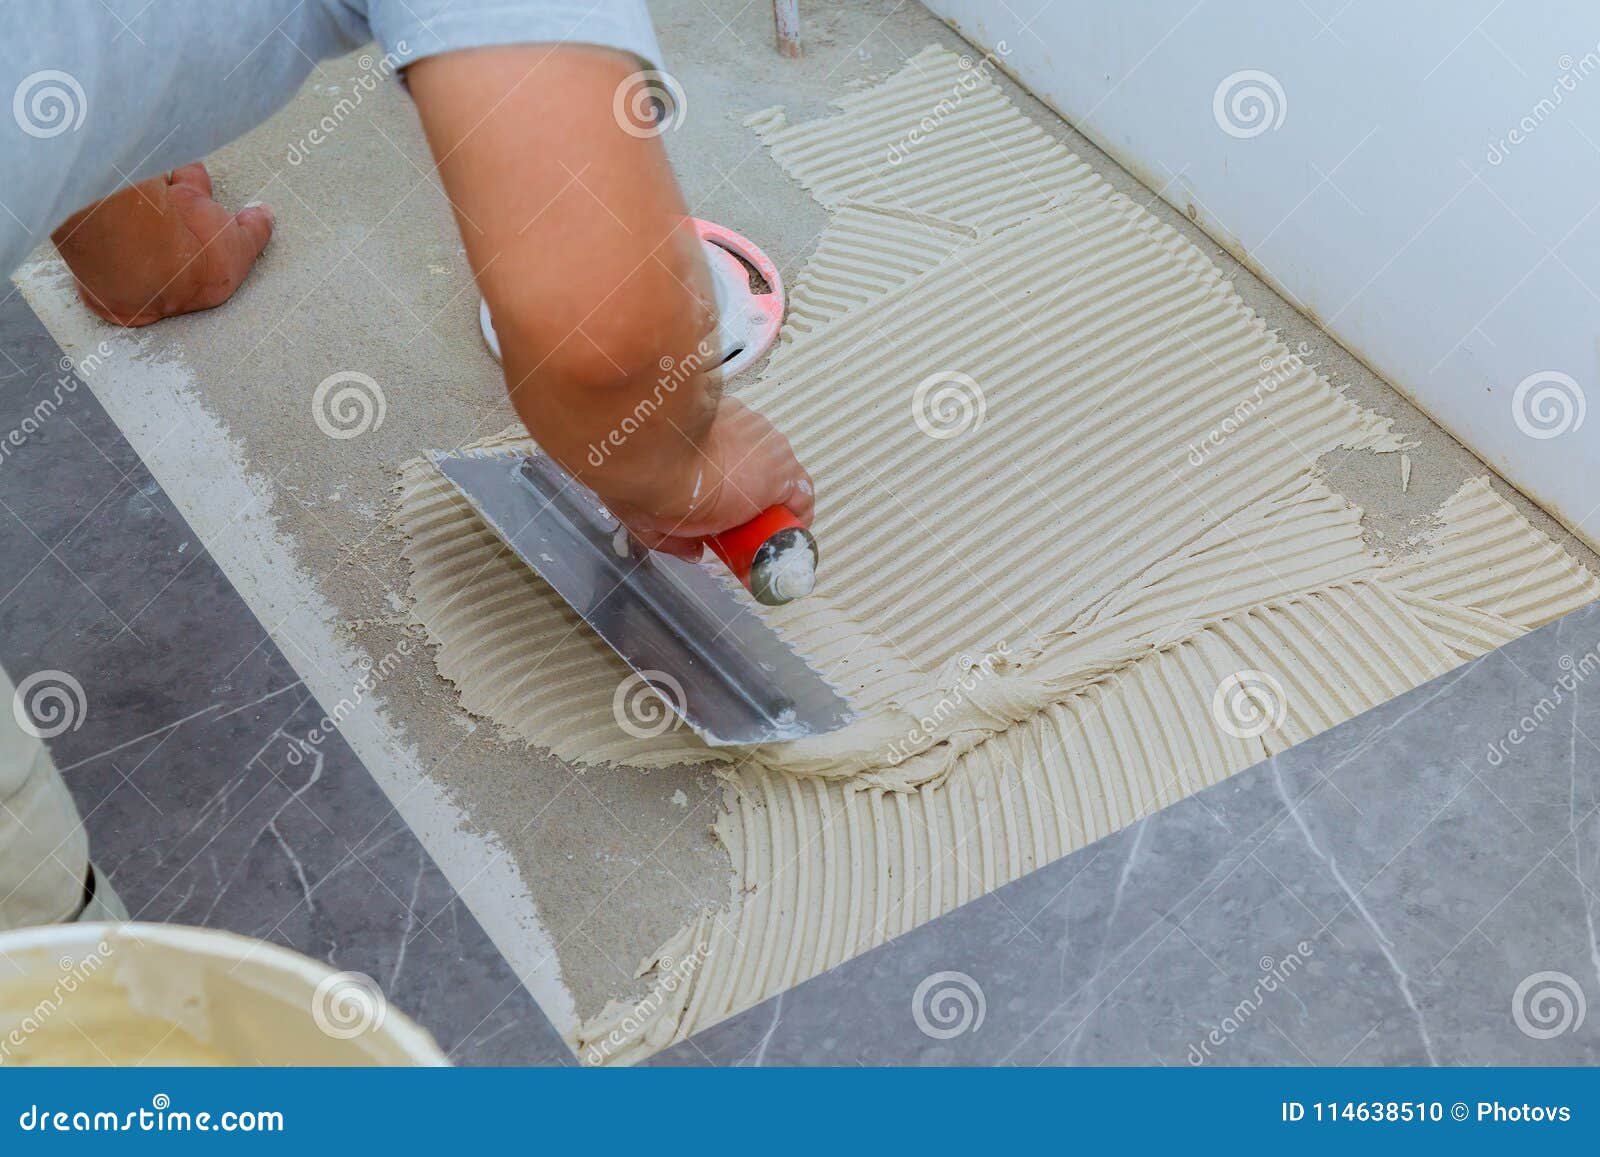 Ceramic Tiles And Tools For Tiler Floor Tiles Installation Home